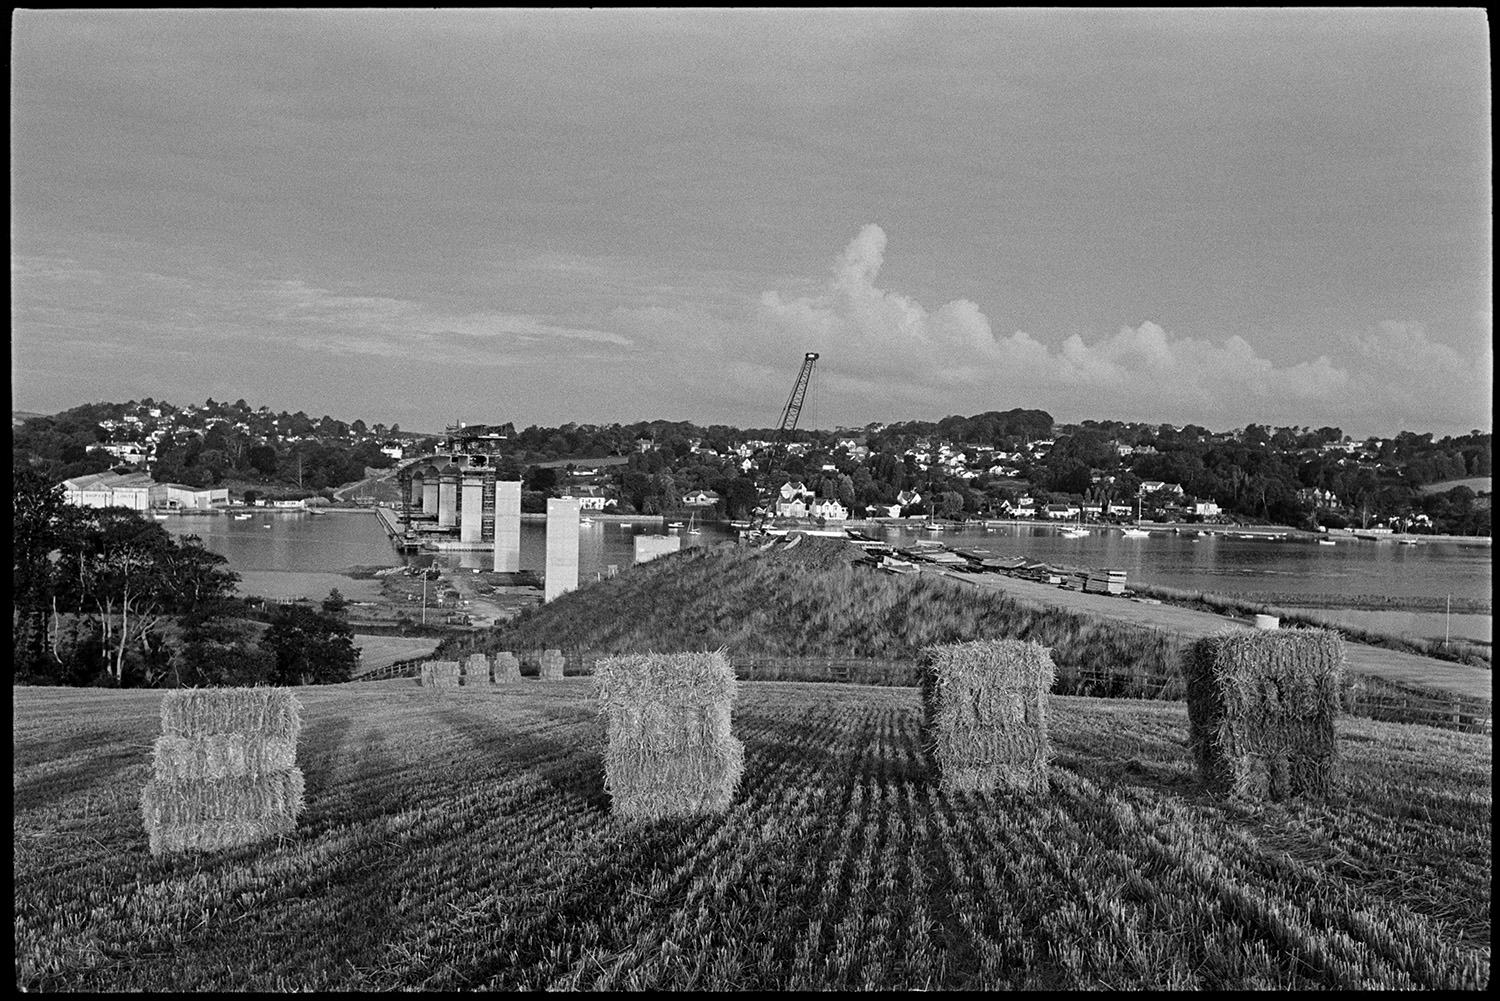 Bales of hay with bridge under construction in background.
[Straw bales standing in a field at Bideford with Bideford New Bridge being built over the River Torridge in the background.]